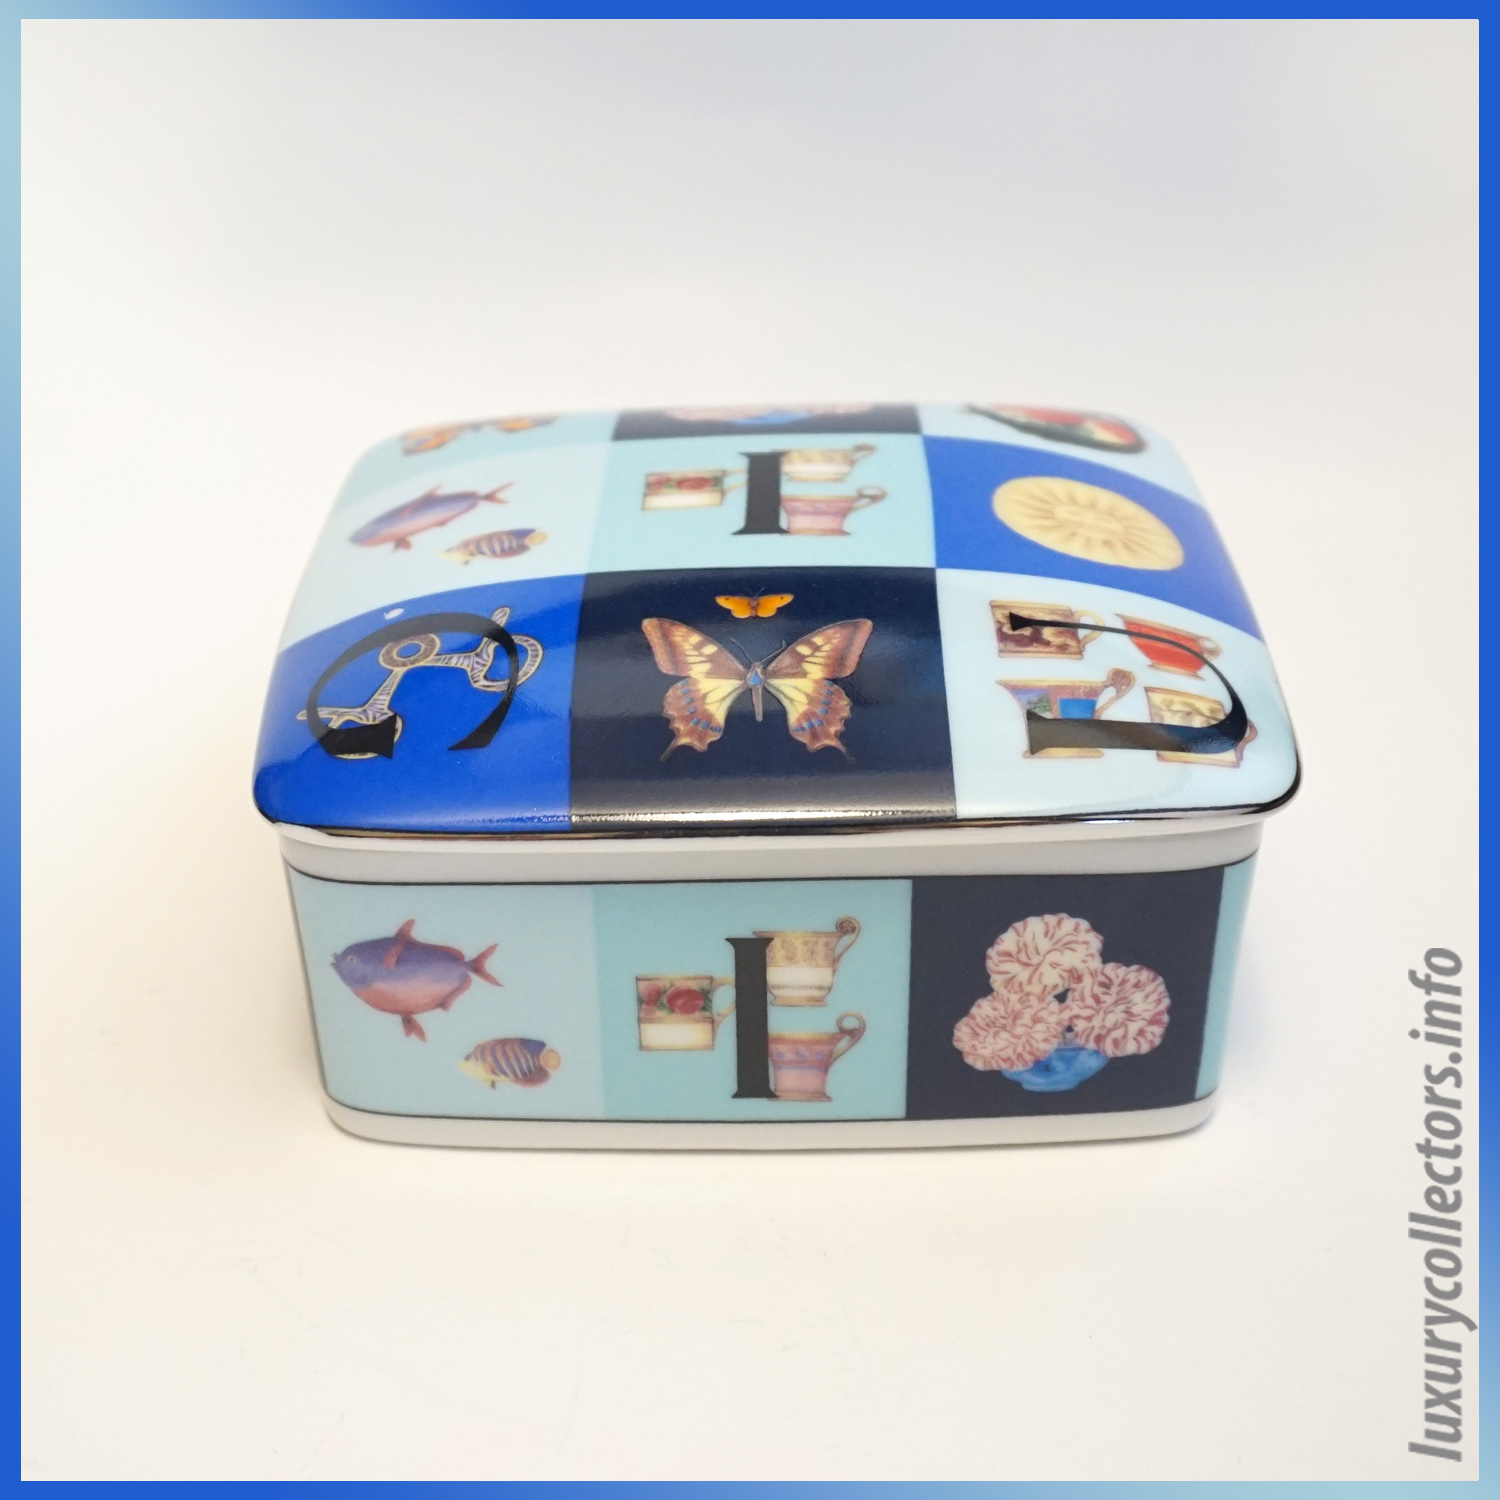 Gucci Home Housewares Decor Tableware Coffee China Porcellana Covered Box lid Candy Butterfly